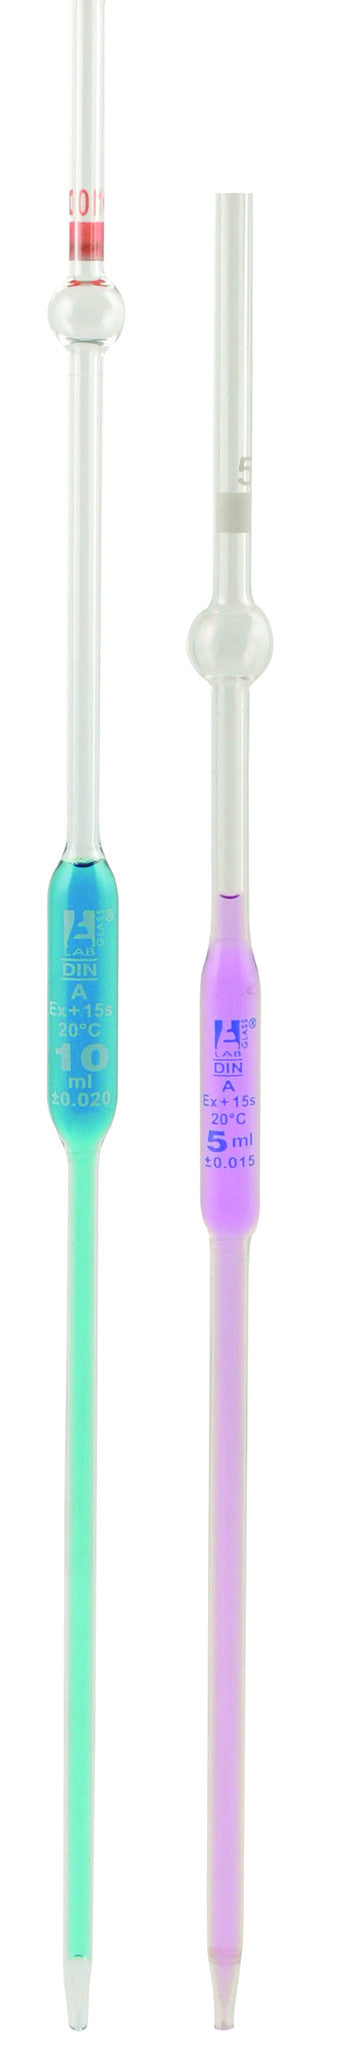 Pipettes Class - B with Safety Bulb, 50 ml, White Graduation